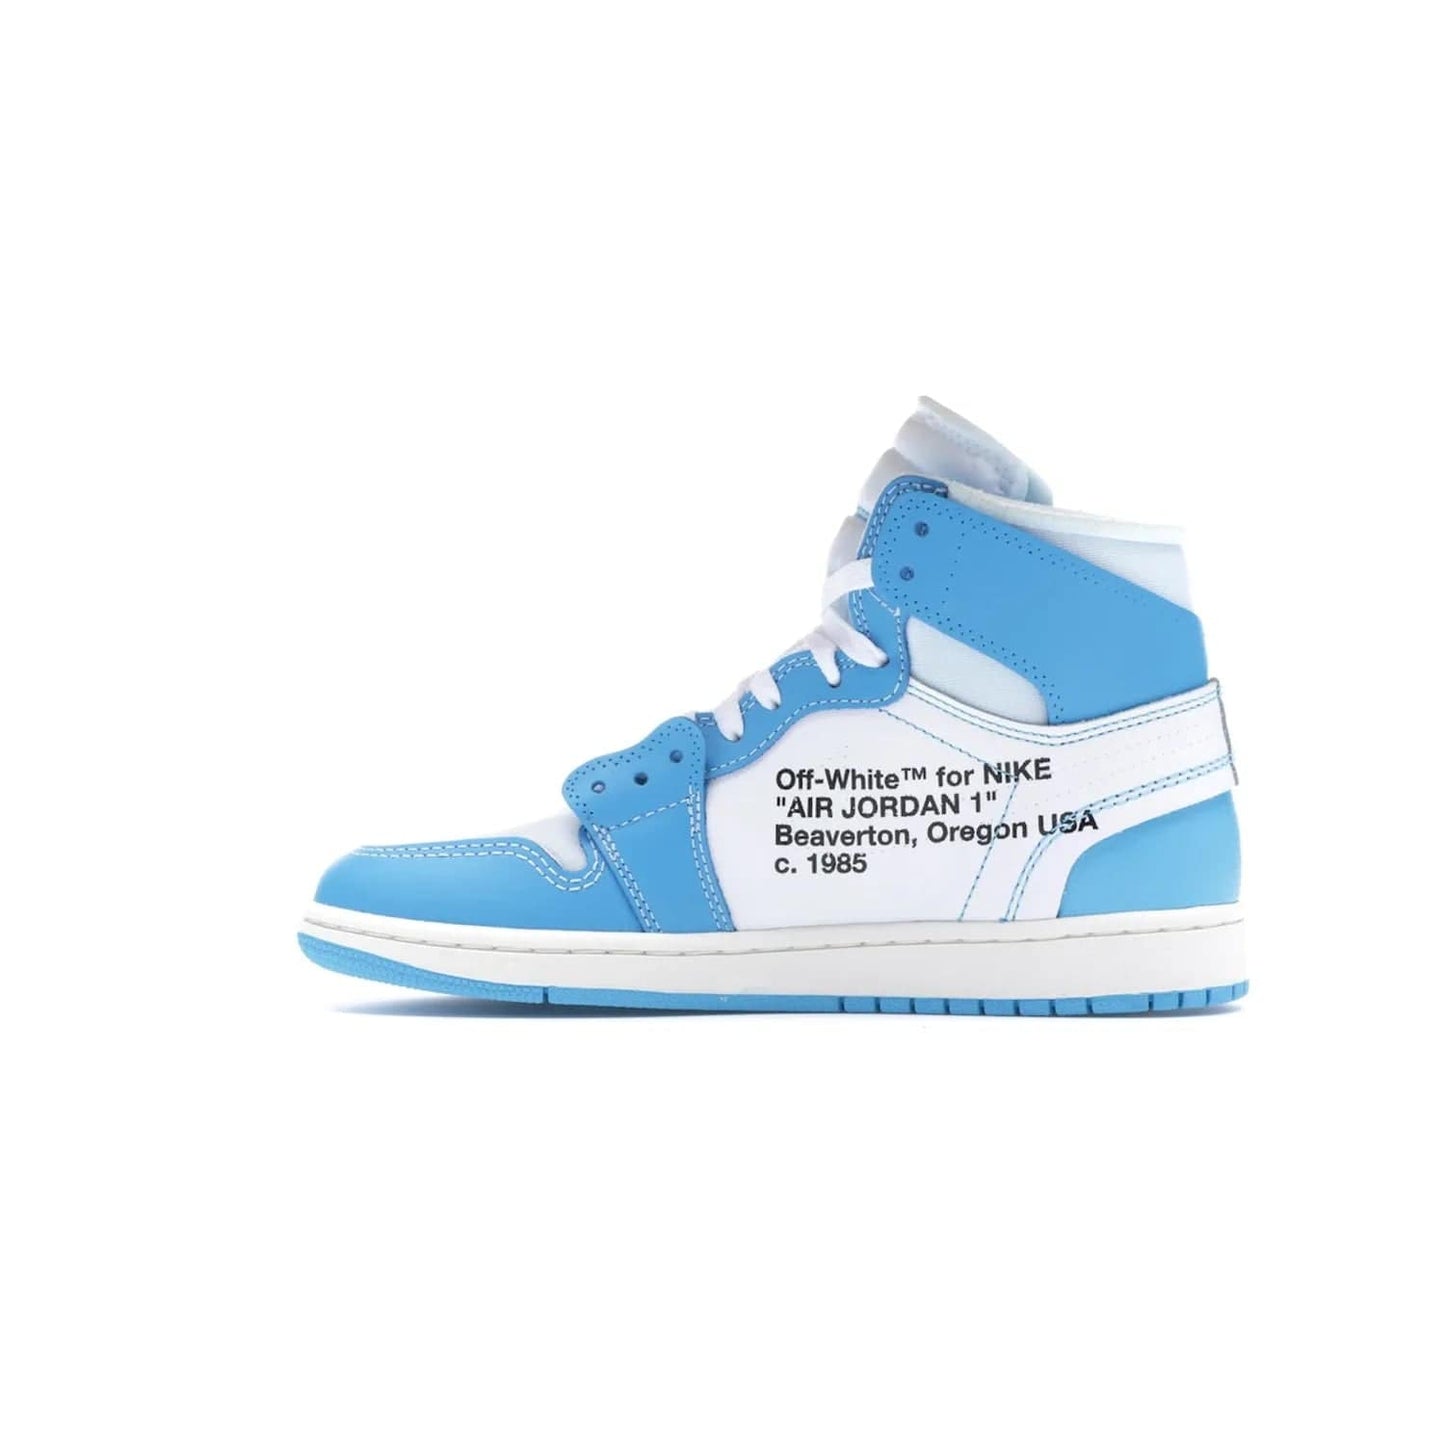 Jordan 1 Retro High Off-White University Blue - Image 20 - Only at www.BallersClubKickz.com - Classic Jordan 1 Retro High "Off-White UNC" sneakers meld style and comfort. Boasting deconstructed white and blue leather, Off-White detailing, and a white, dark powder blue and cone colorway, these sneakers are perfect for dressing up or down. Get the iconic Off-White Jordan 1's and upgrade your look.